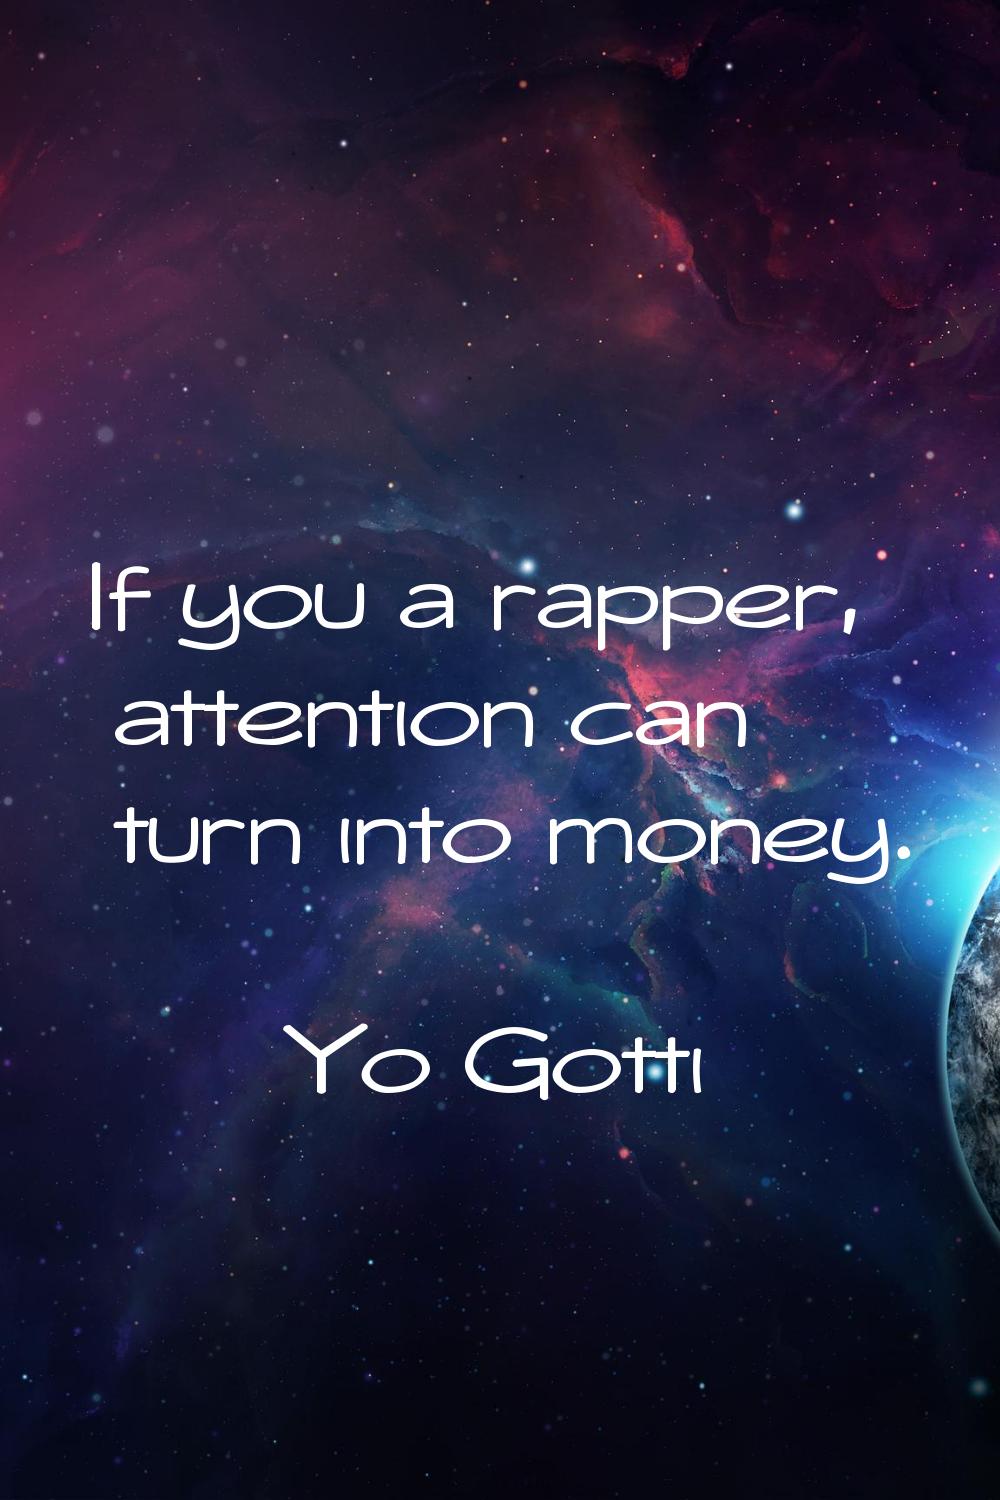 If you a rapper, attention can turn into money.